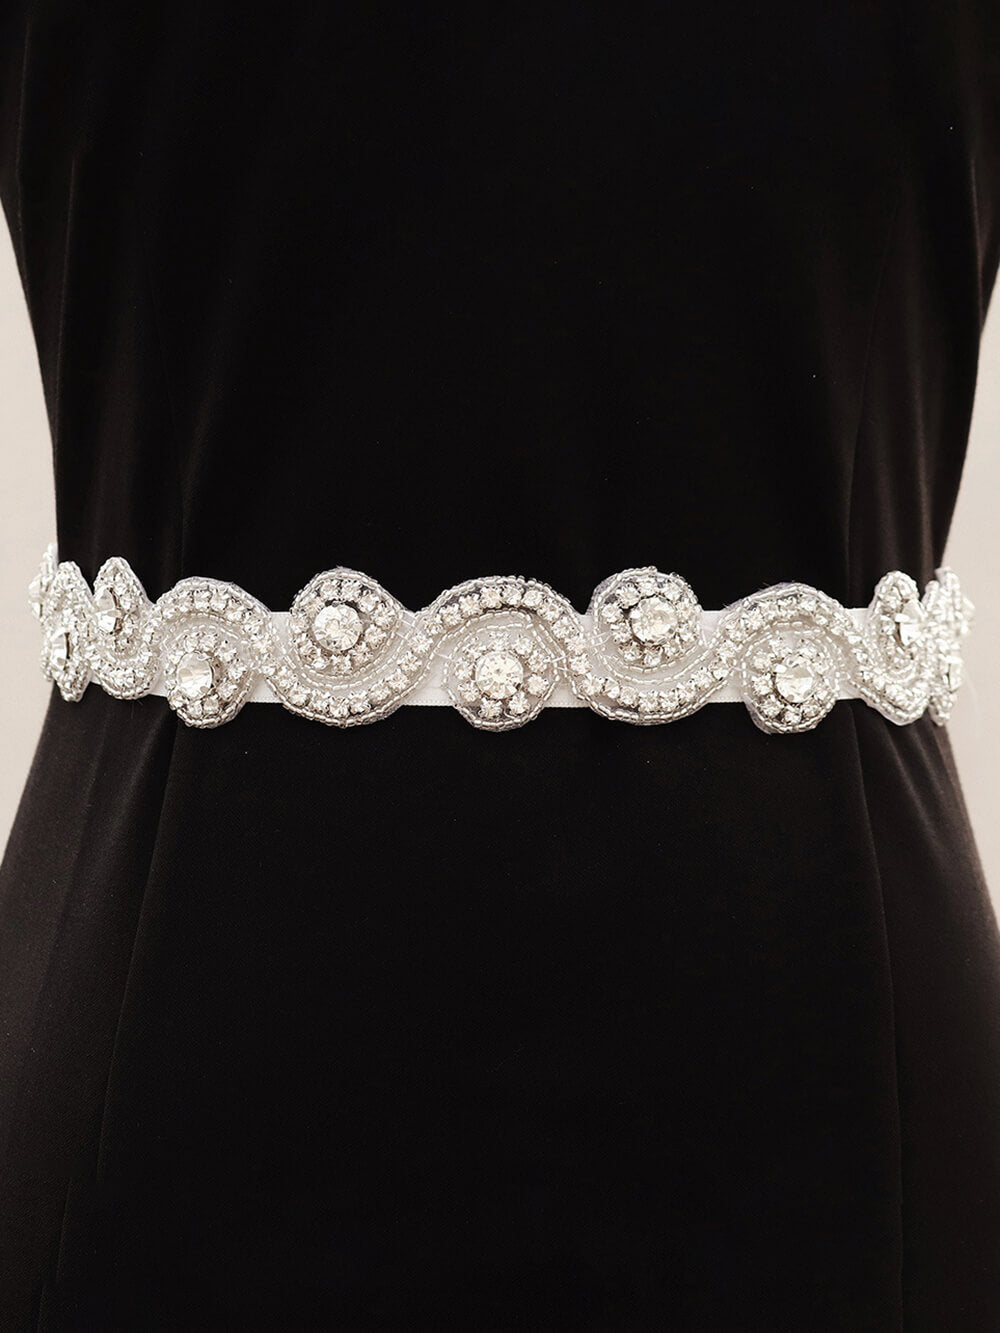 Exquisite And Beautiful Hand-Stitched Wedding Dress Belt